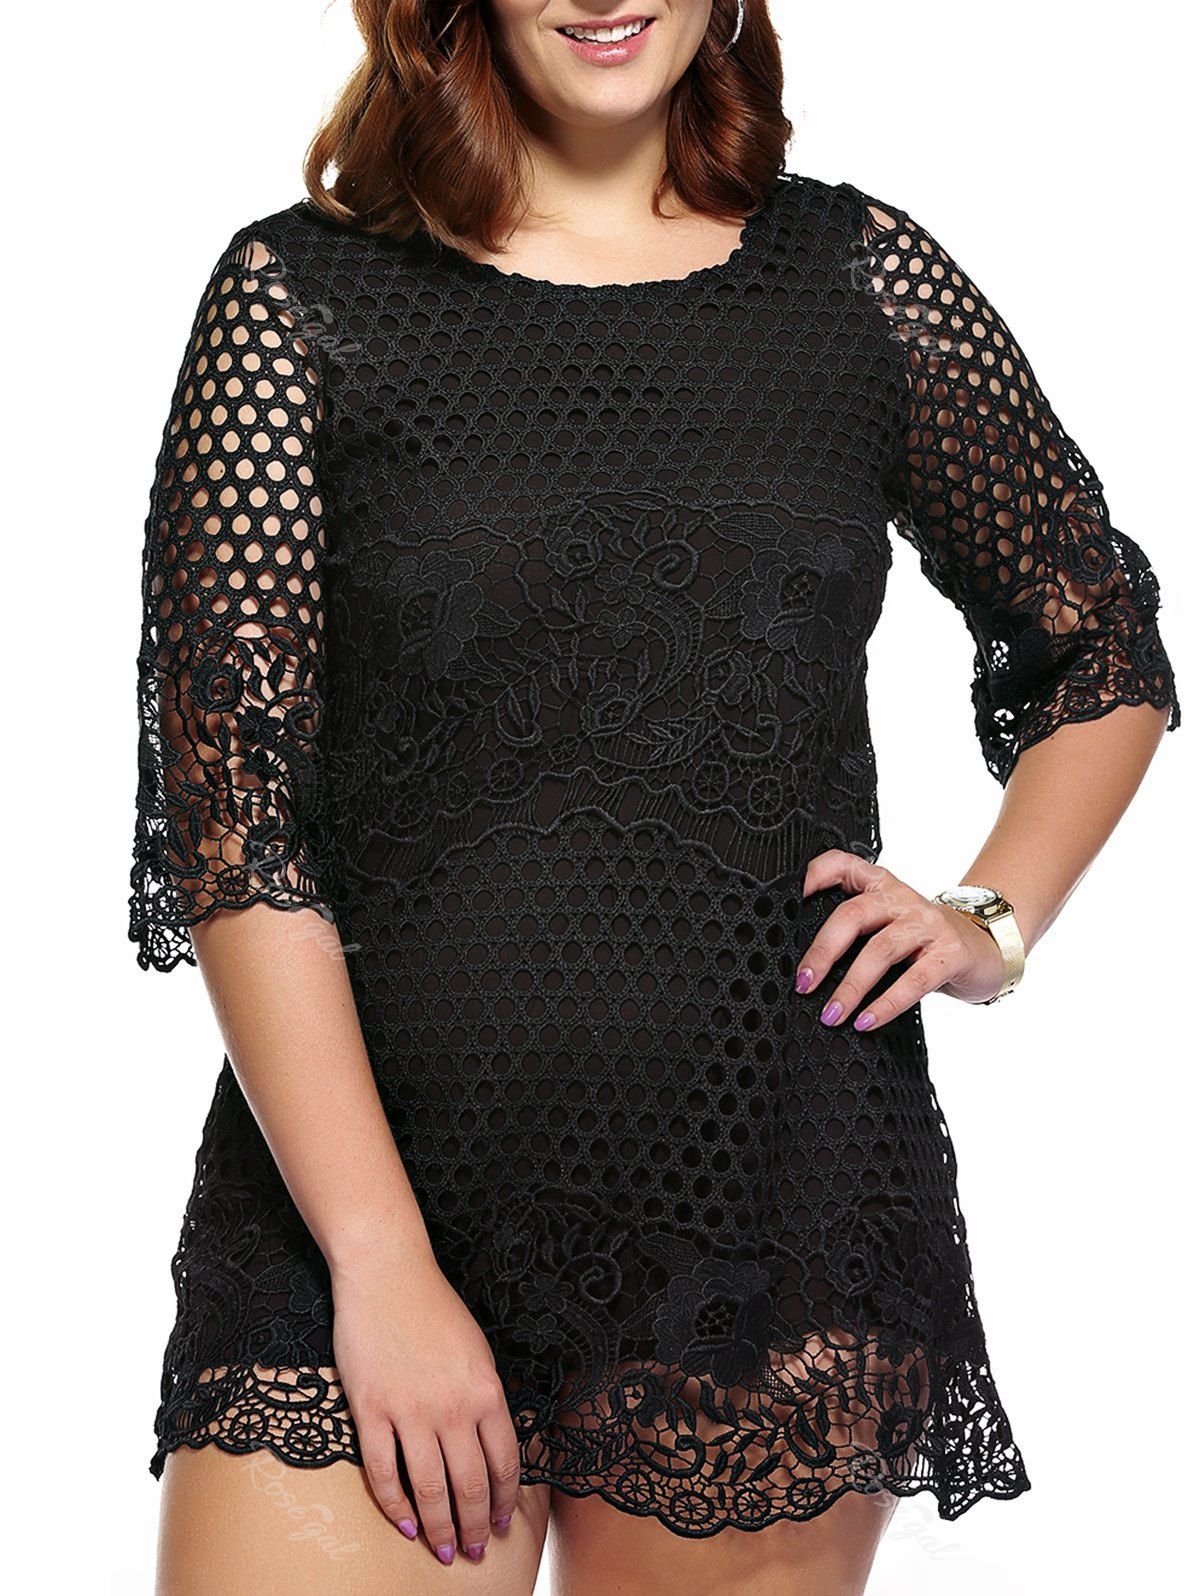 2018 Stylish Plus Size Cutwork Lace Overlay Dress For Women In Black ...